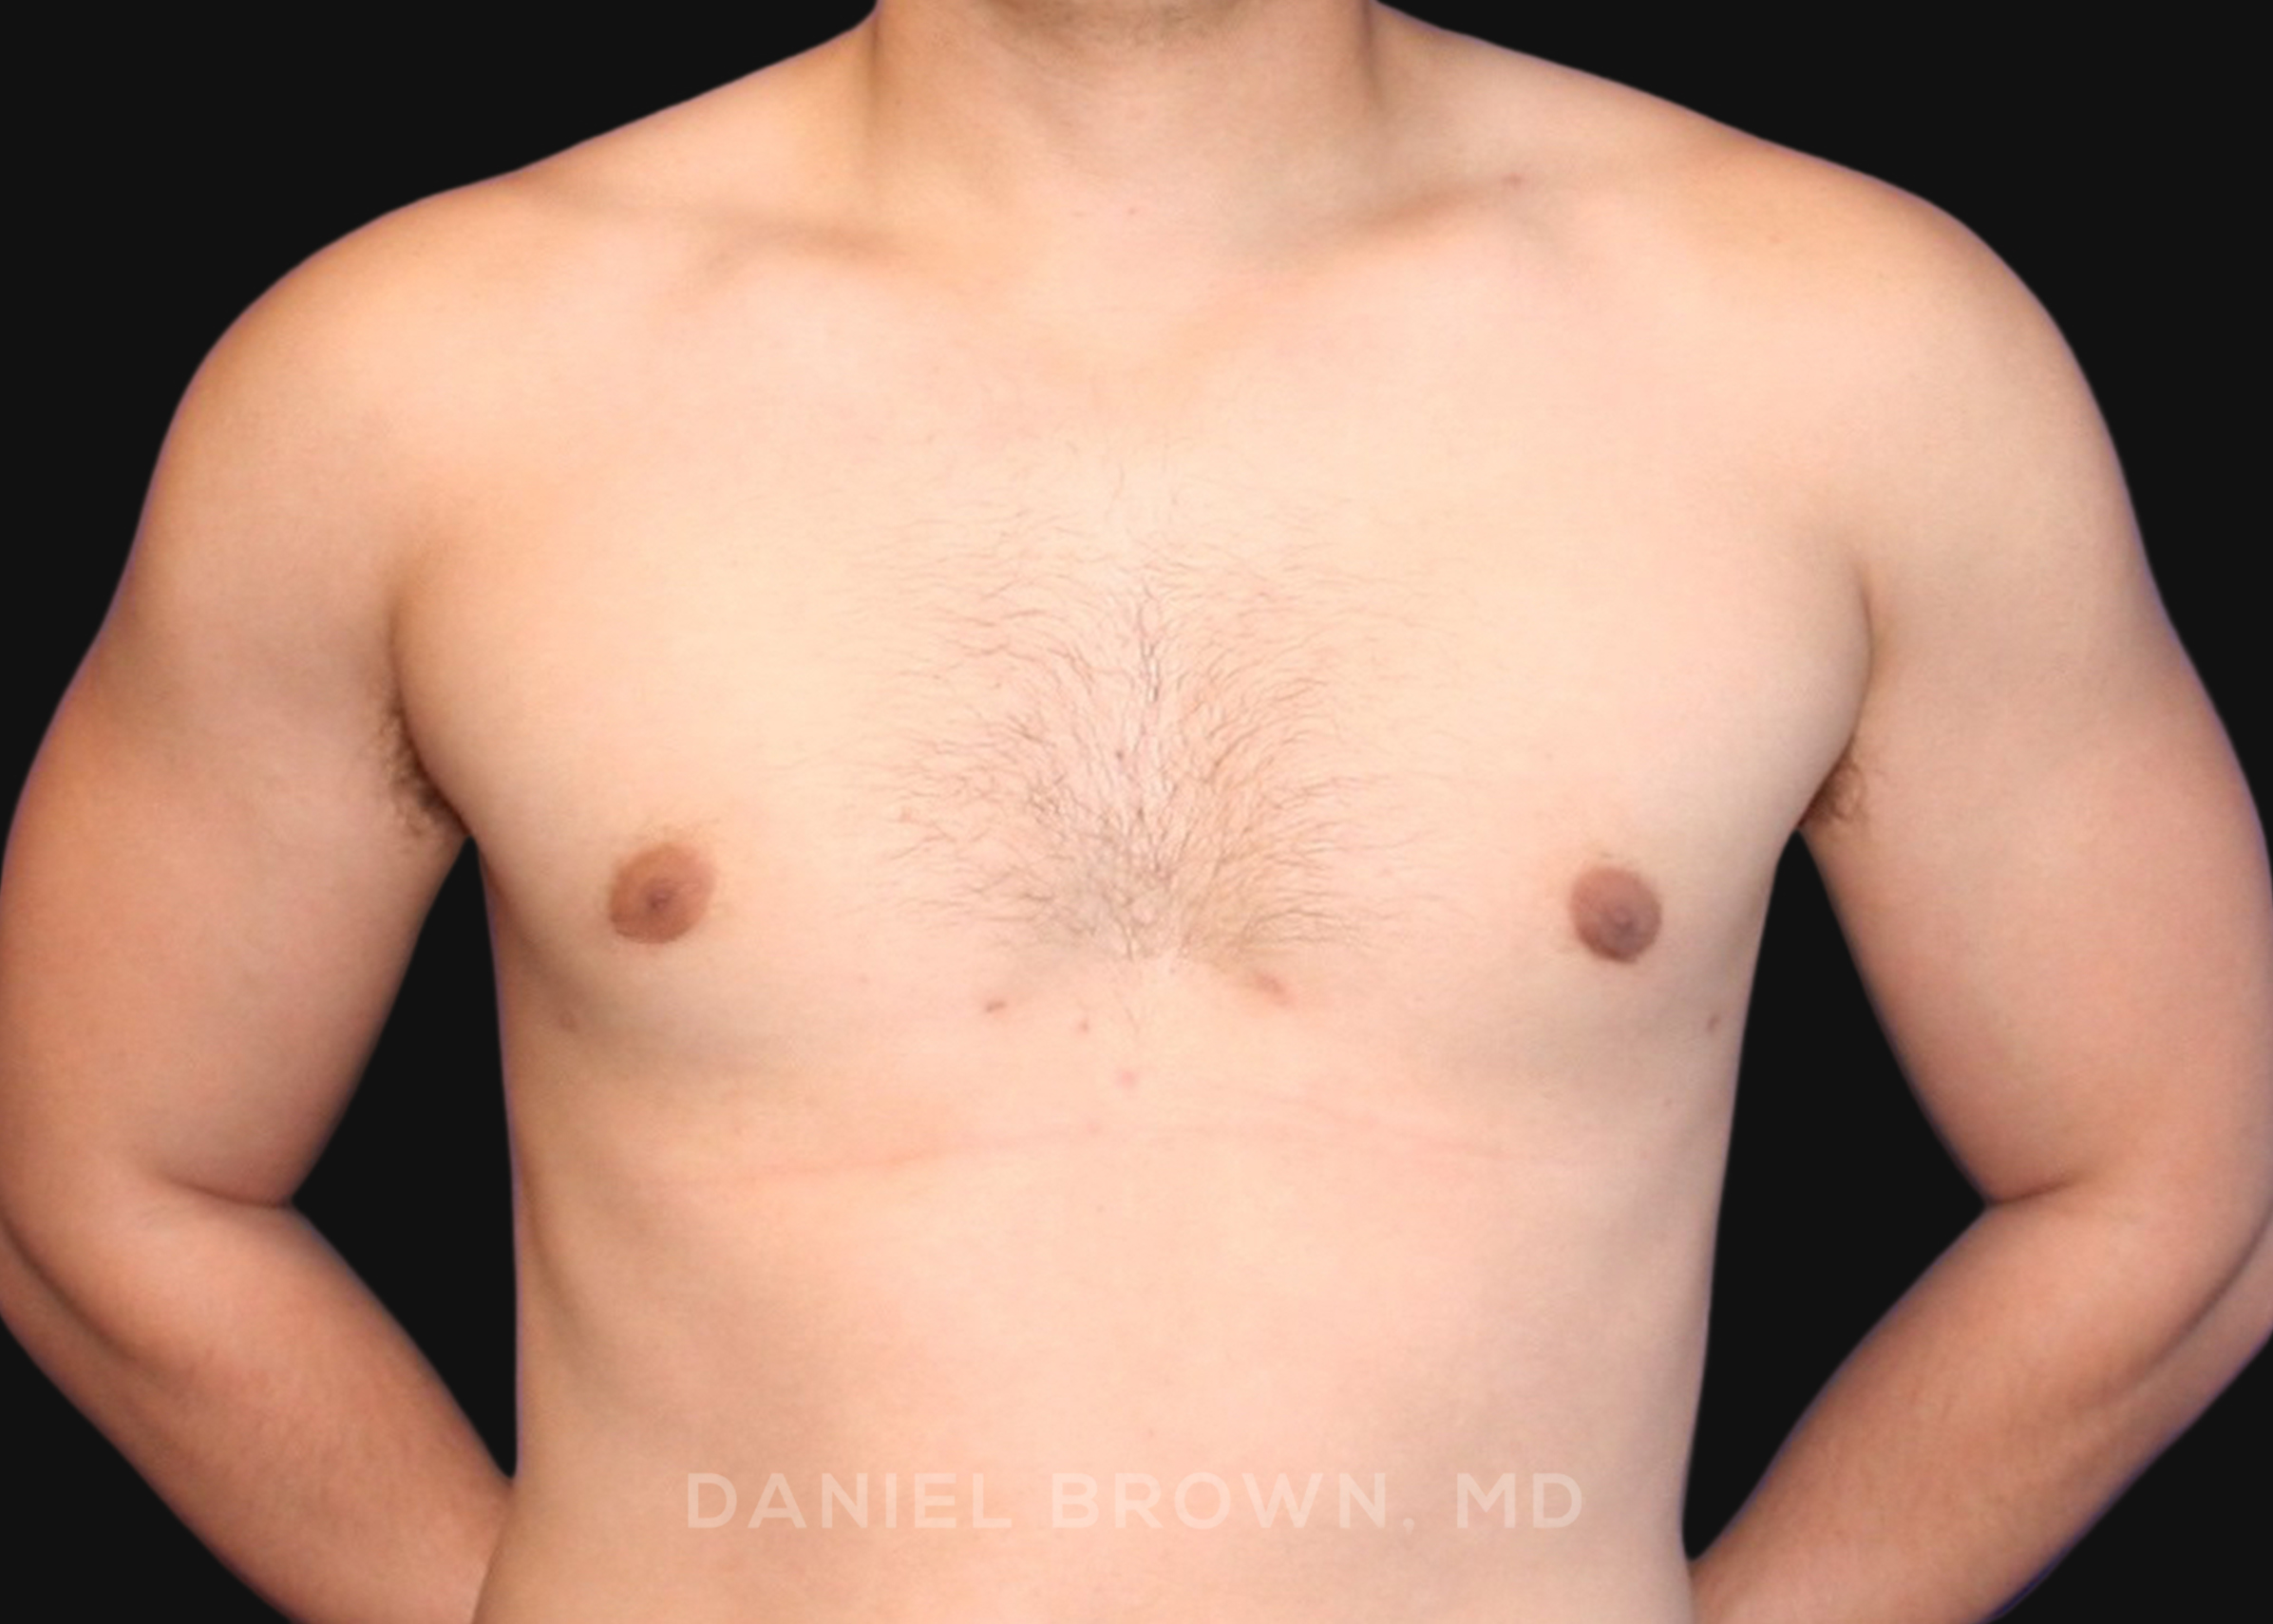 Male Breast Reduction Patient Photo - Case 2562 - after view